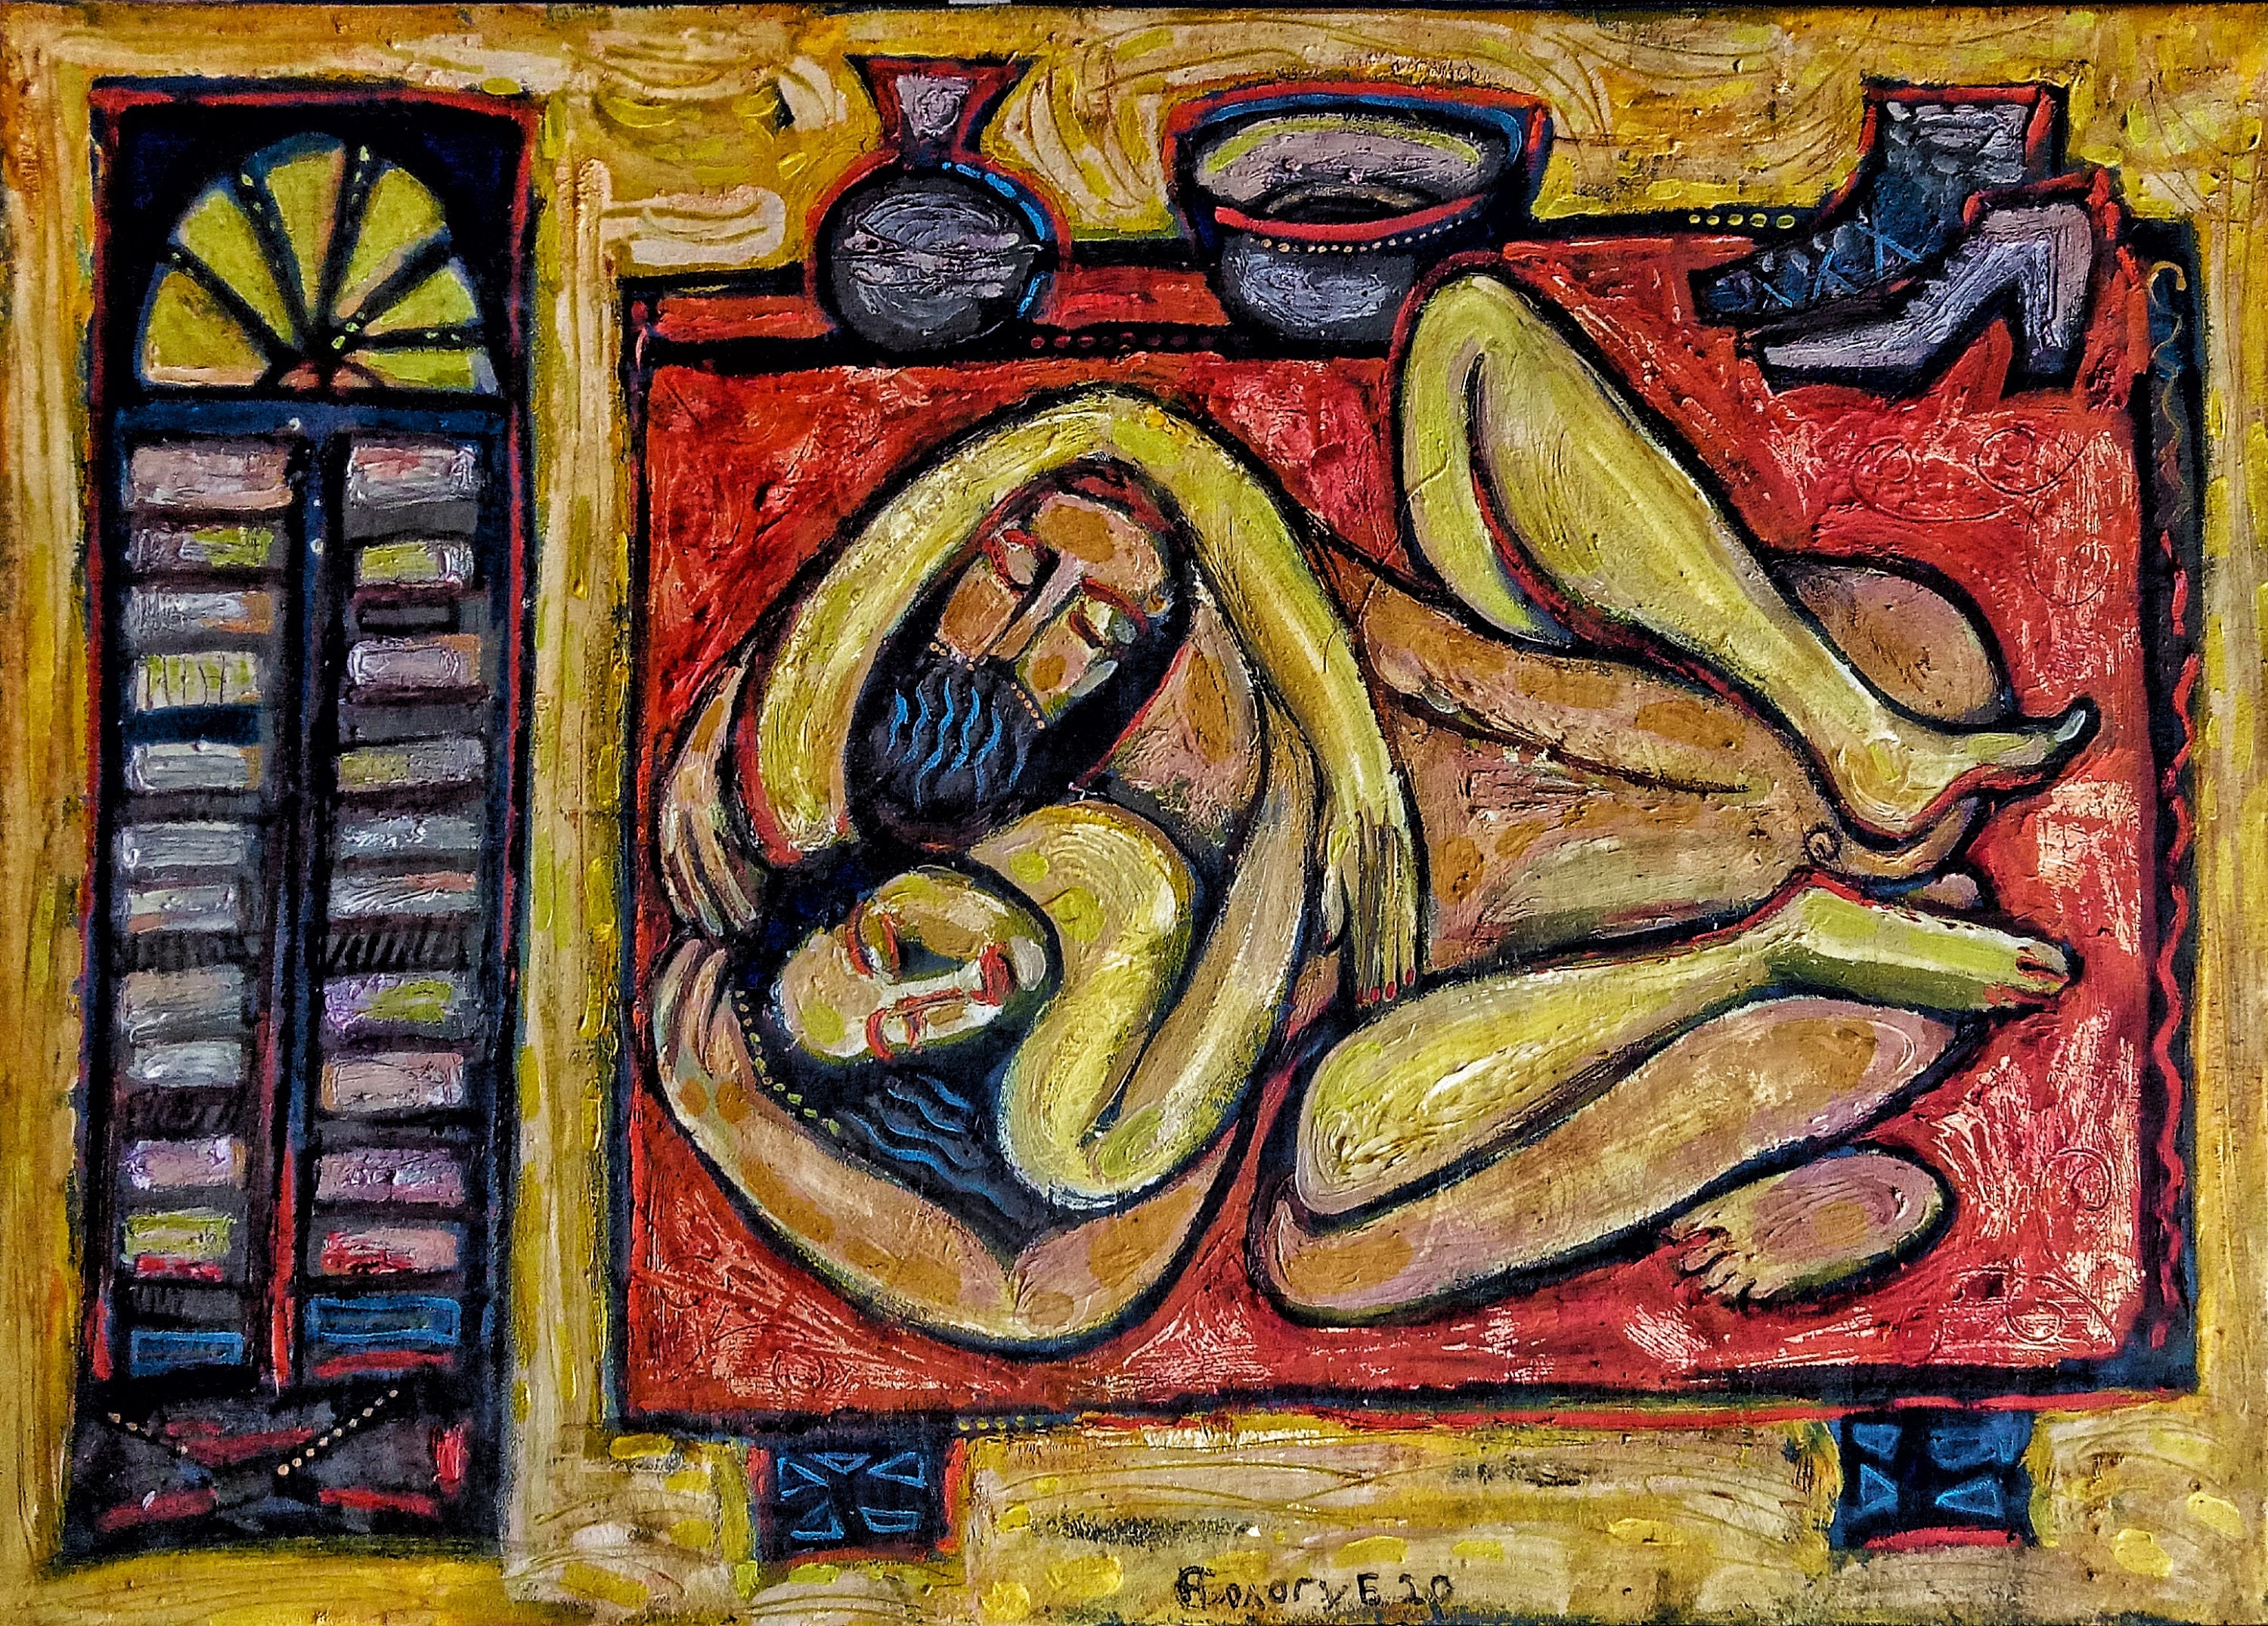 Kamasutra Act of Love Original Painting by Sologubov Oil on photo